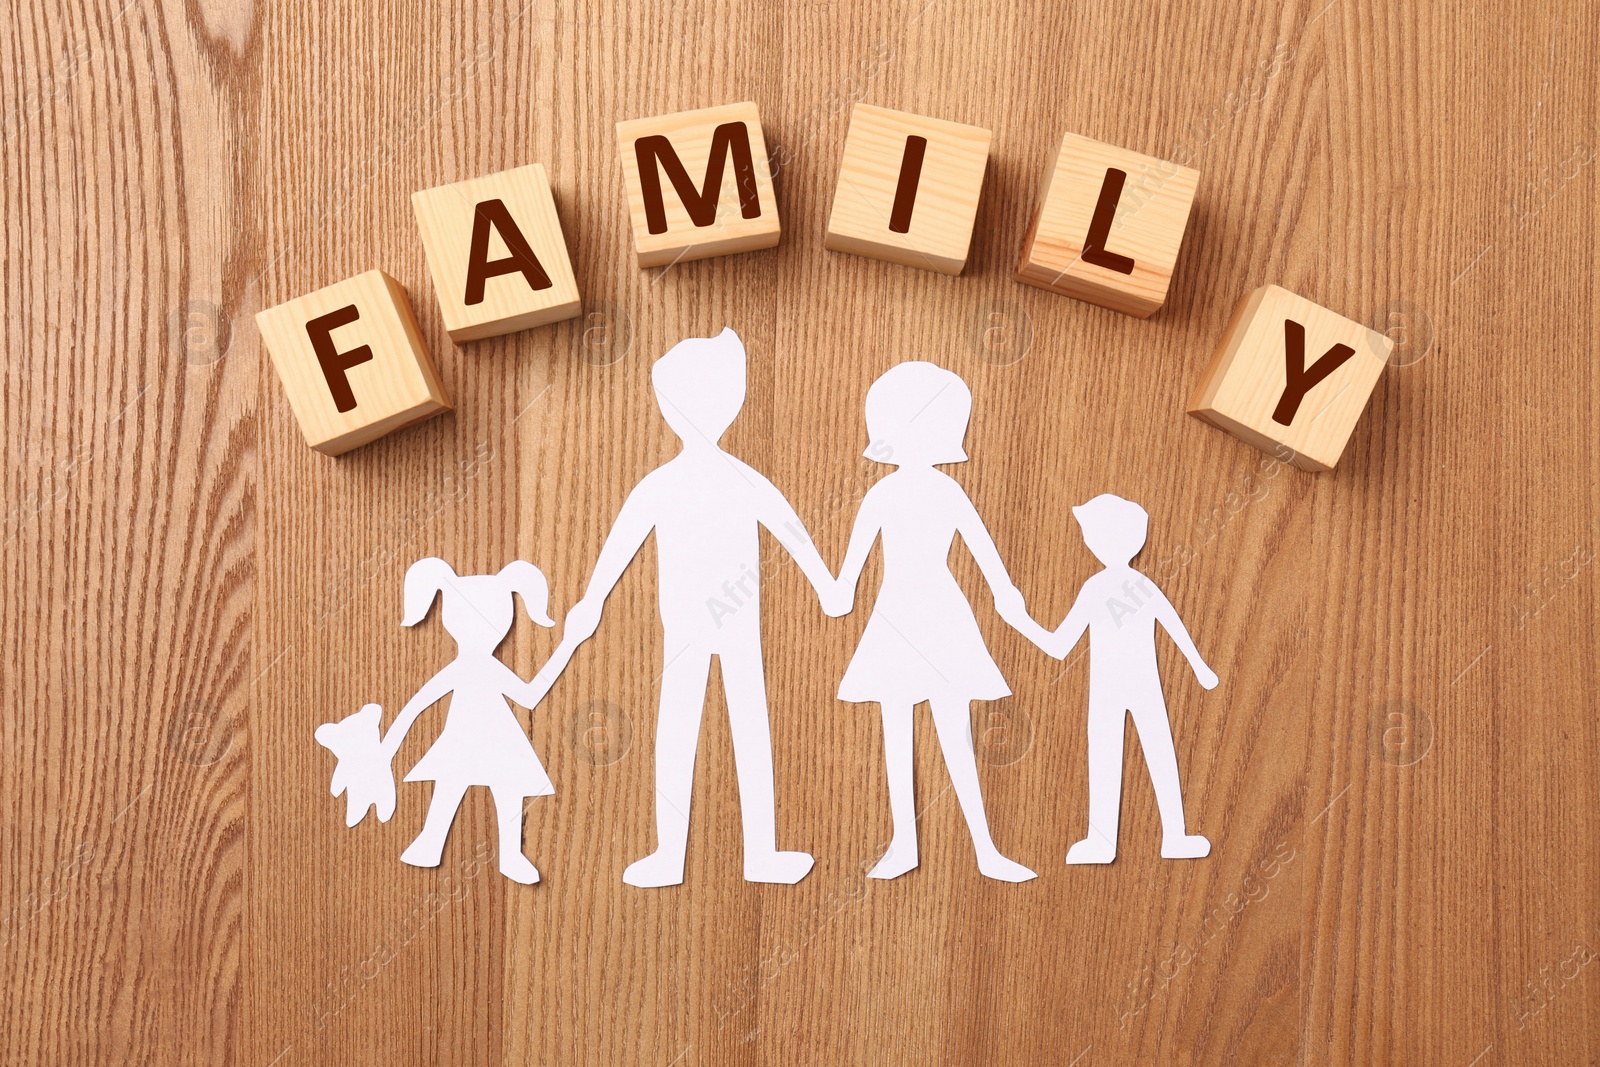 Photo of Paper cutout and word Family made of wooden cubes with letters on table, flat lay